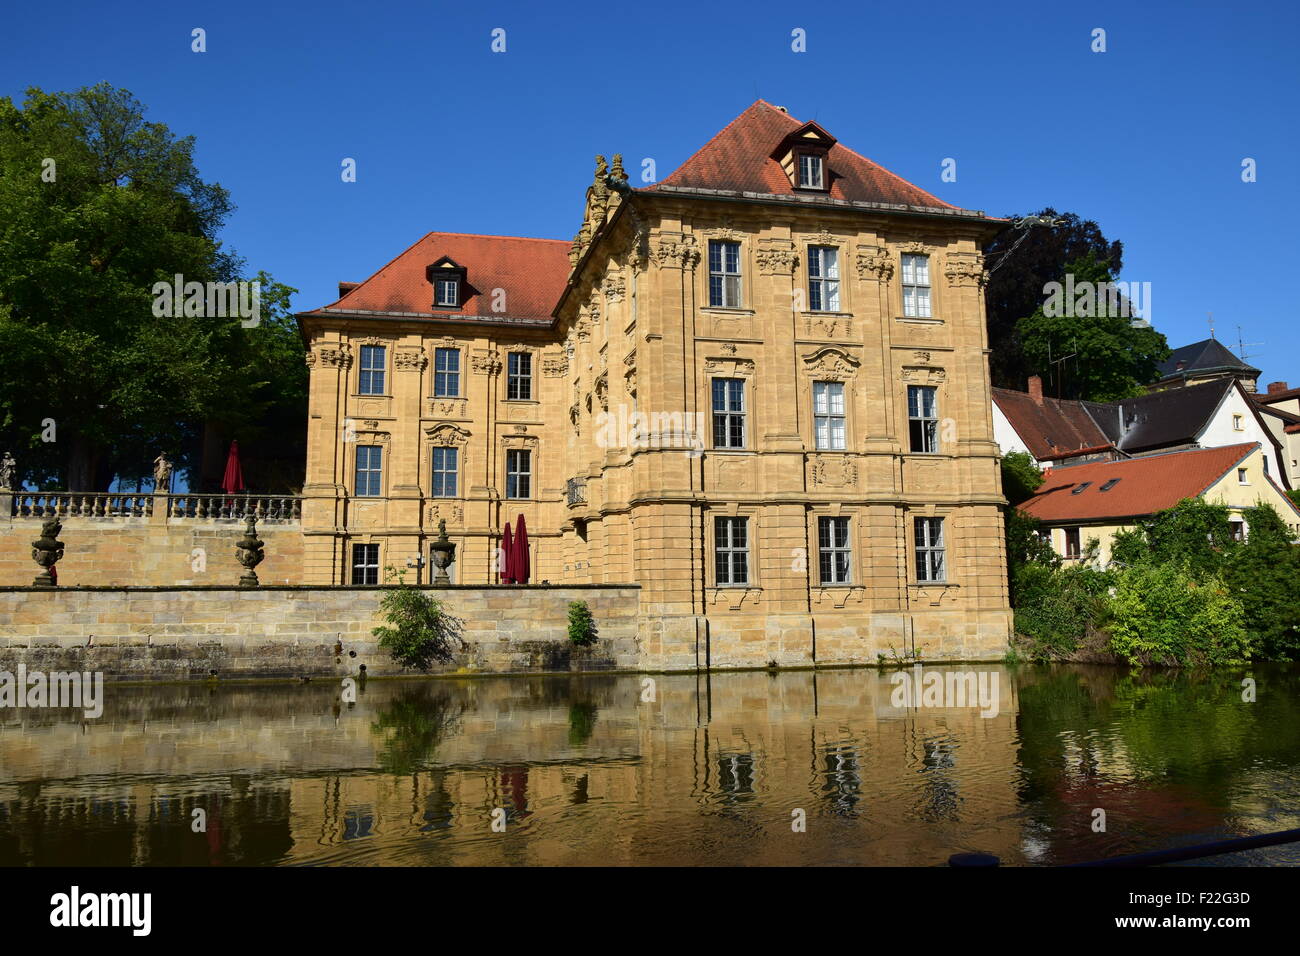 photography hi-res - images germany Alamy stock and 11 Page - Villa